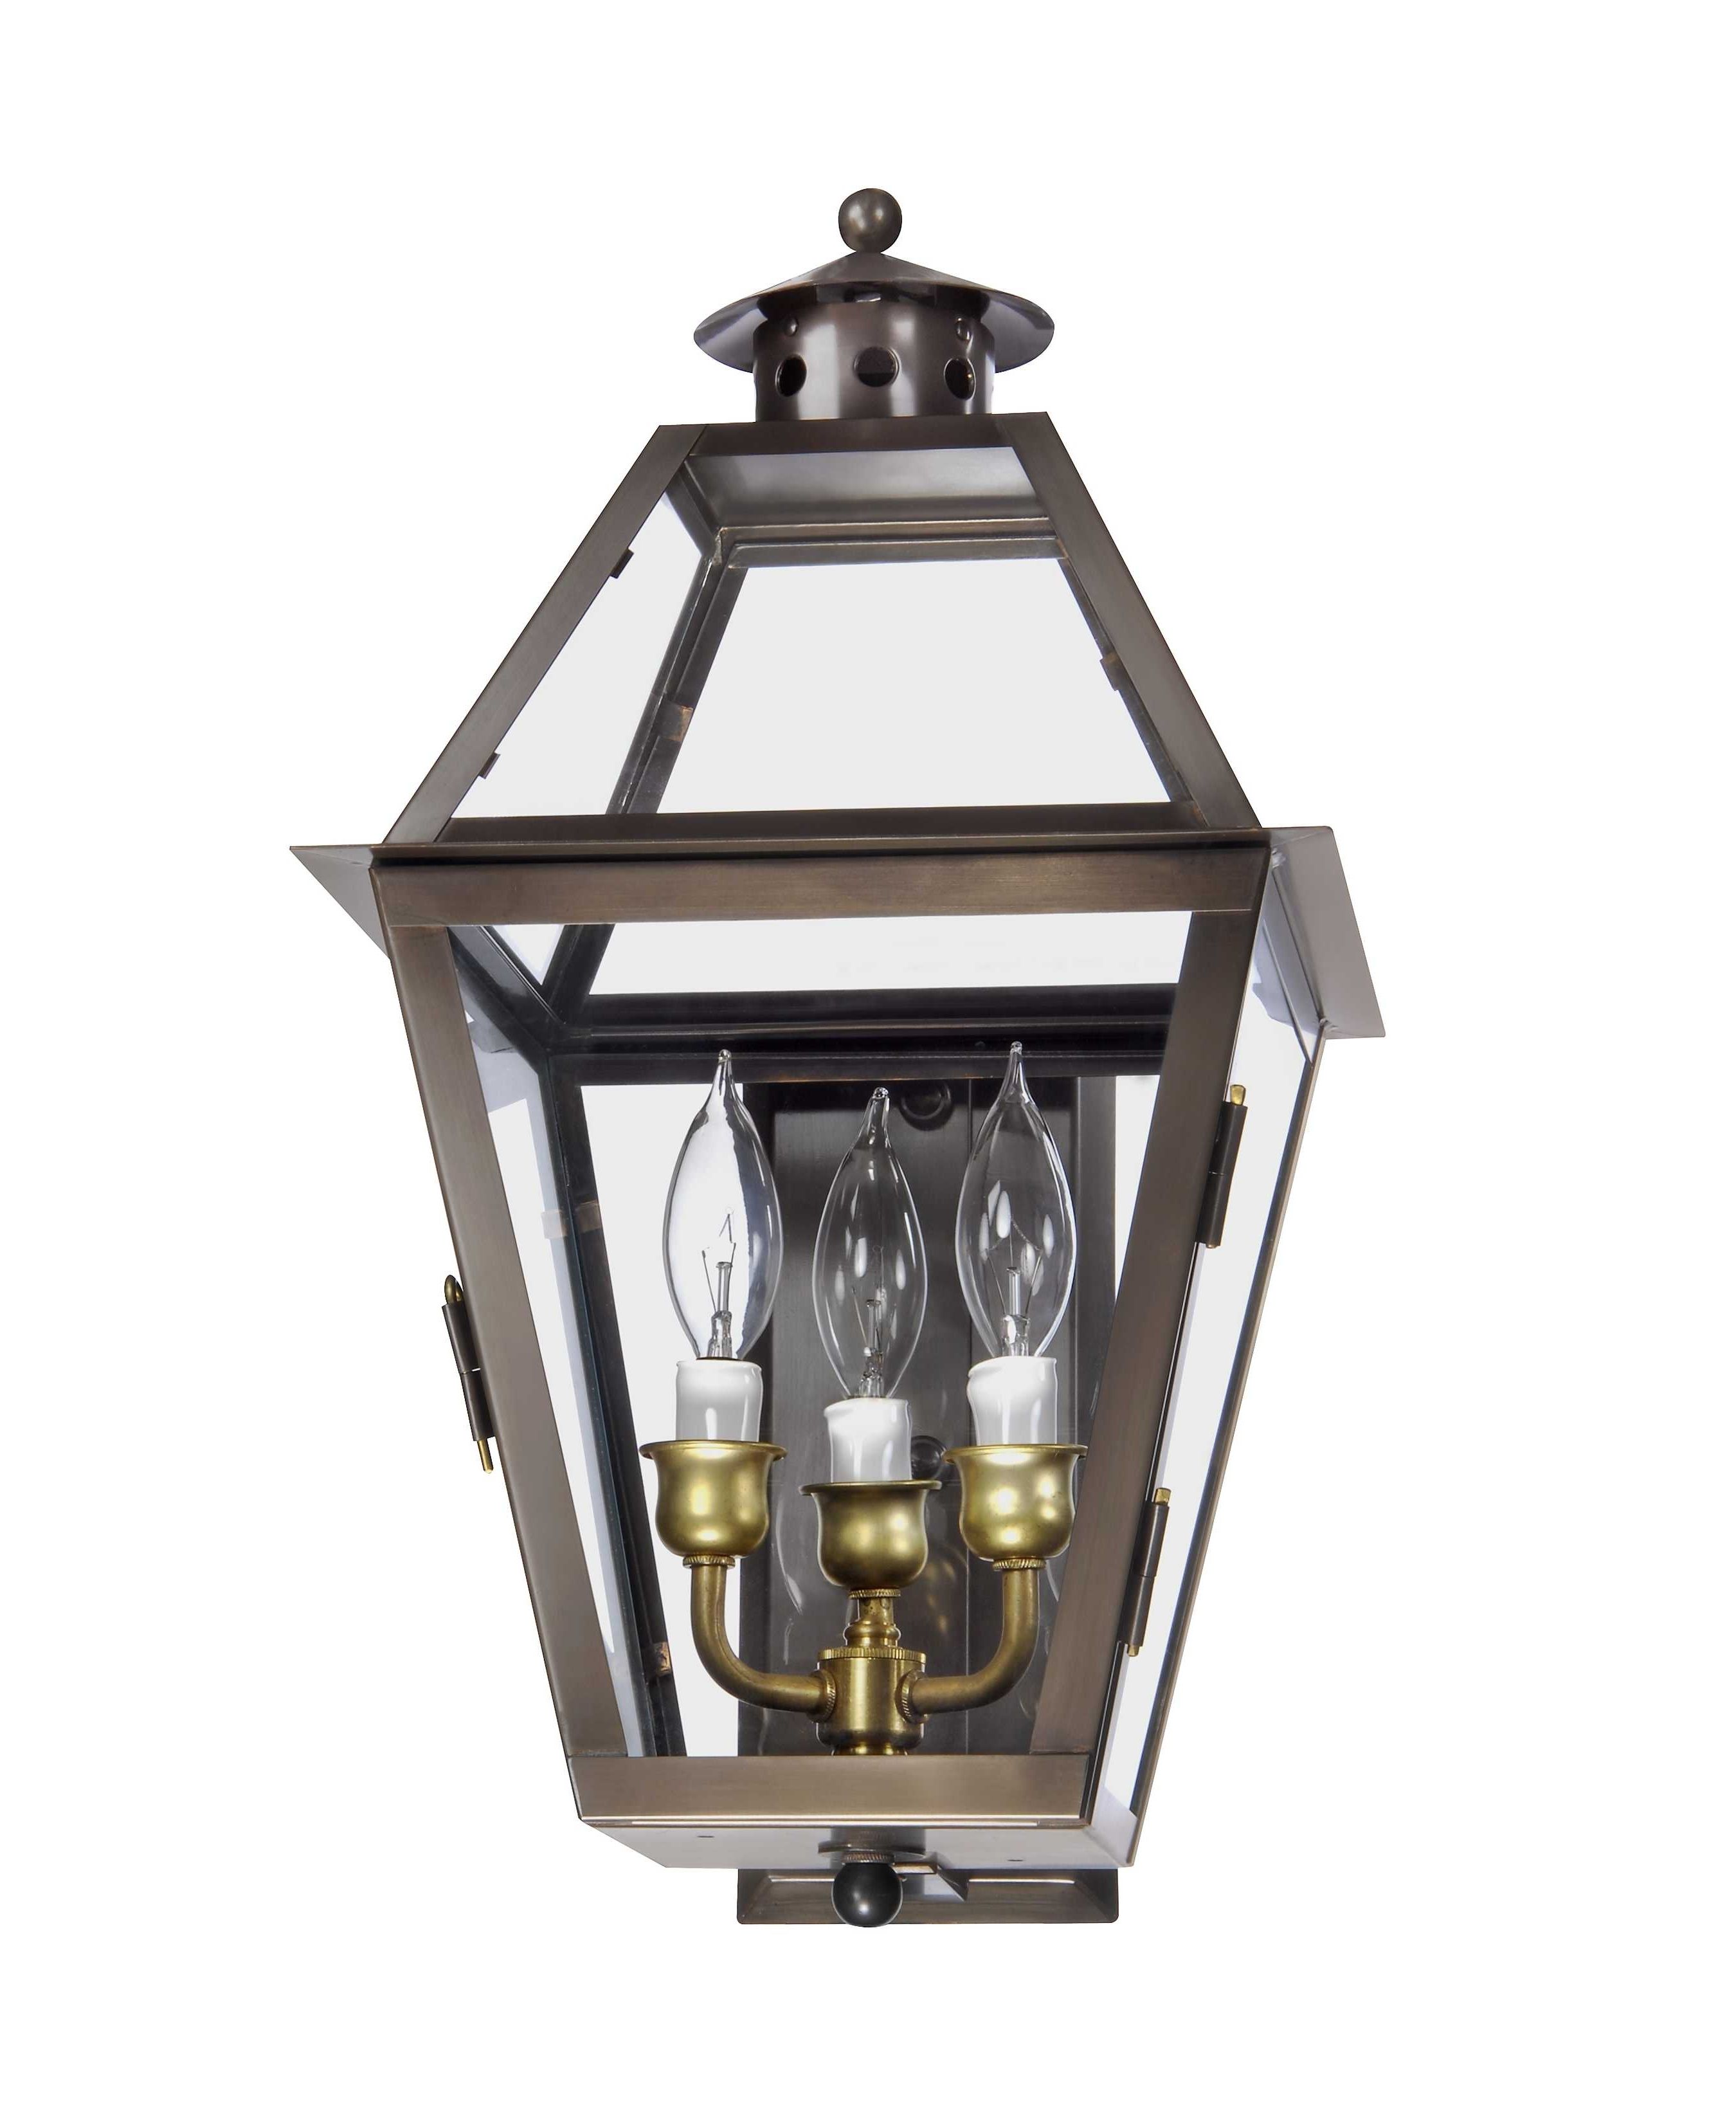 Ch 27 Wall Mount Gas Lantern – Lantern & Scroll With Regard To Copper Outdoor Electric Lanterns (View 1 of 20)